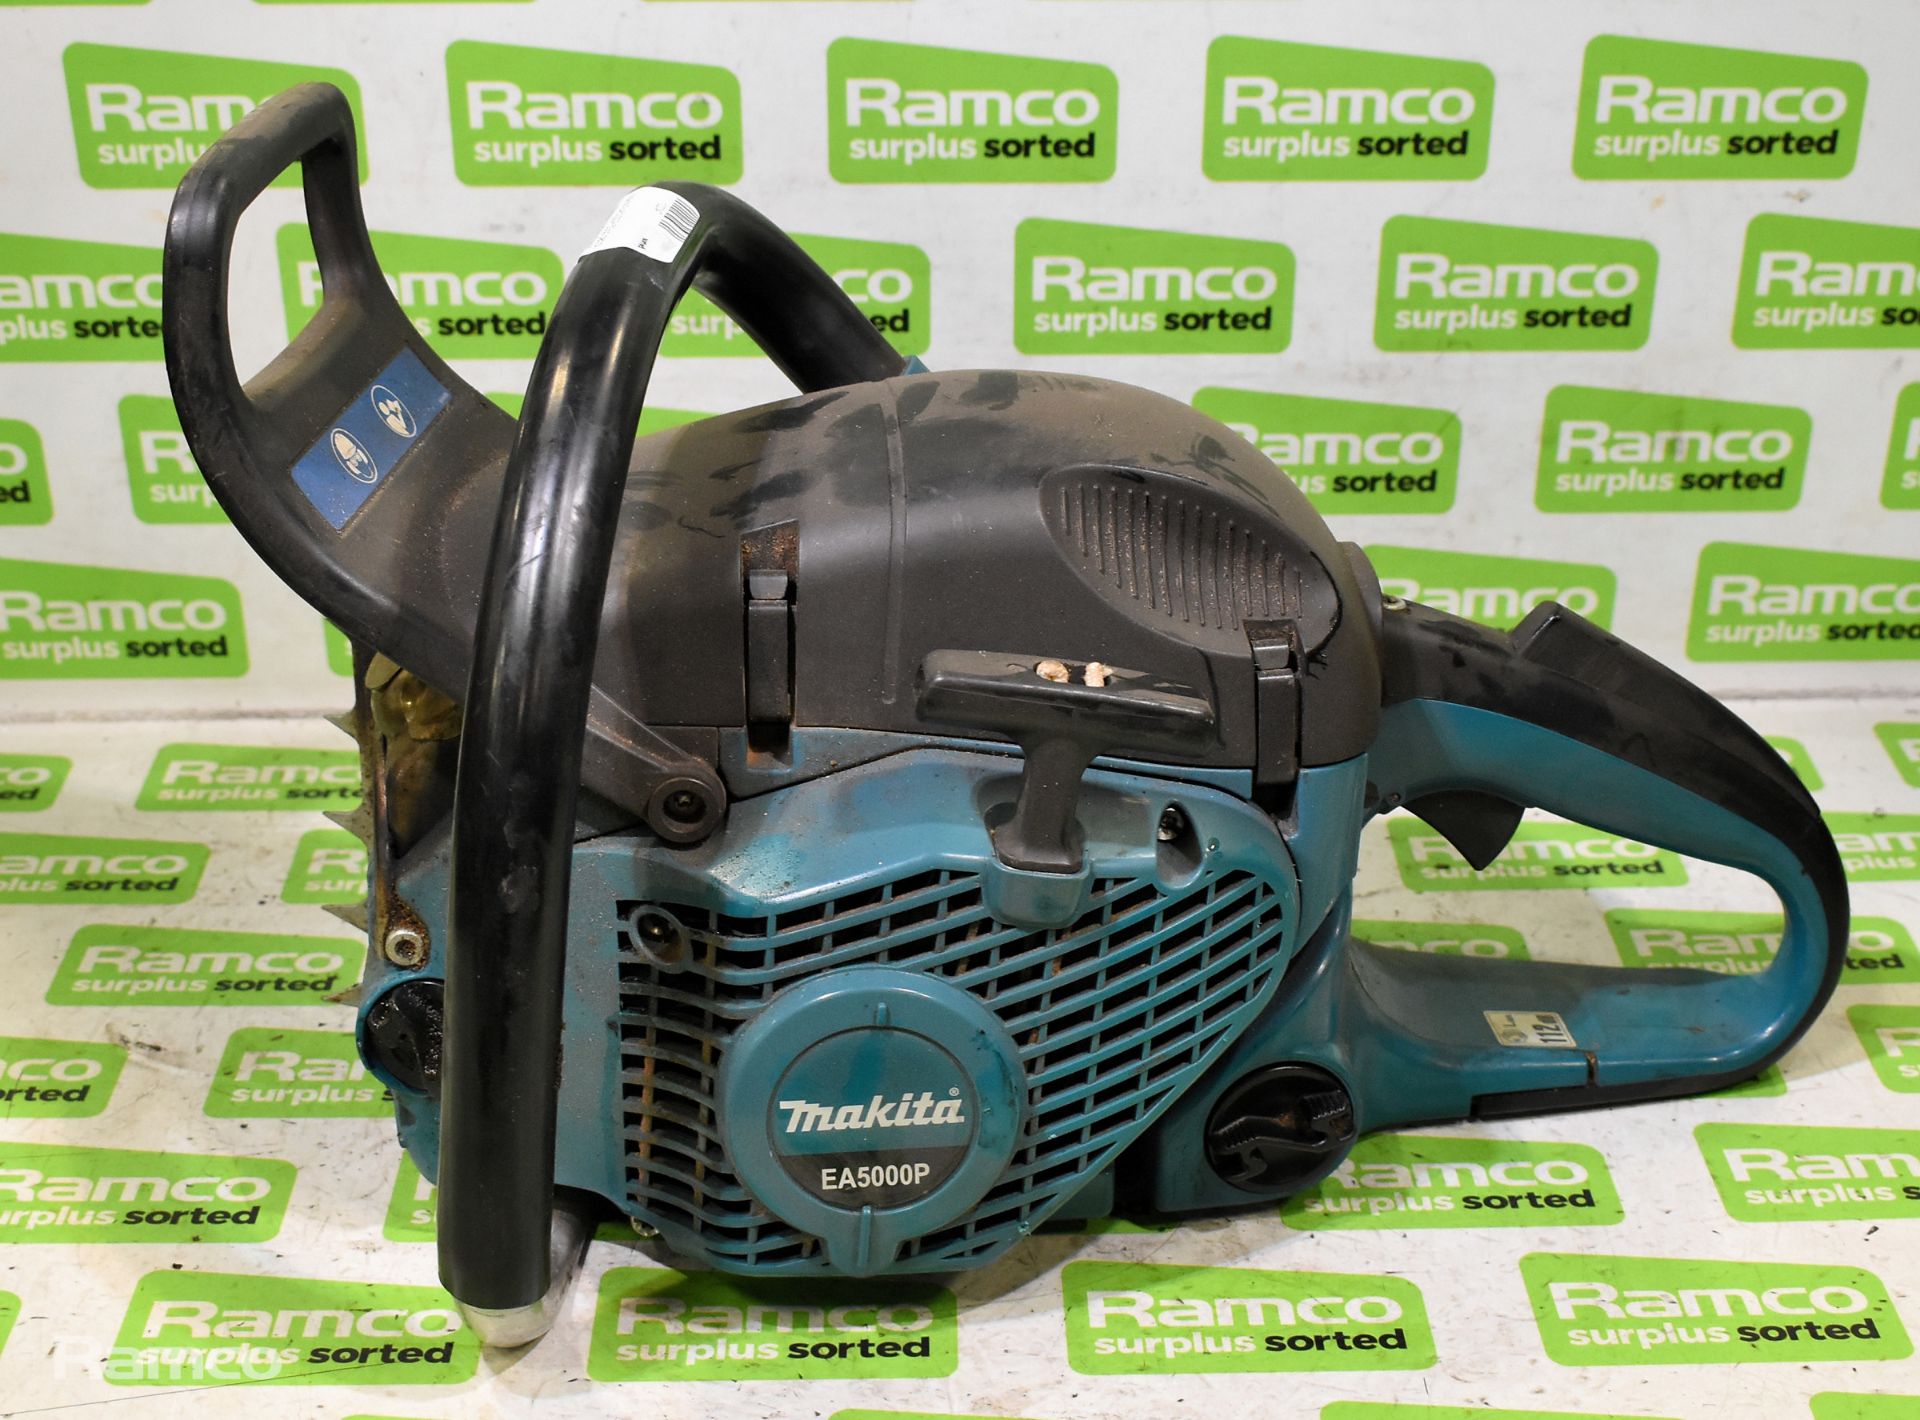 3x Makita DCS5030 50cc petrol chainsaw - BODIES ONLY - AS SPARES AND REPAIRS, 1x Makita EA5000P - Image 15 of 22